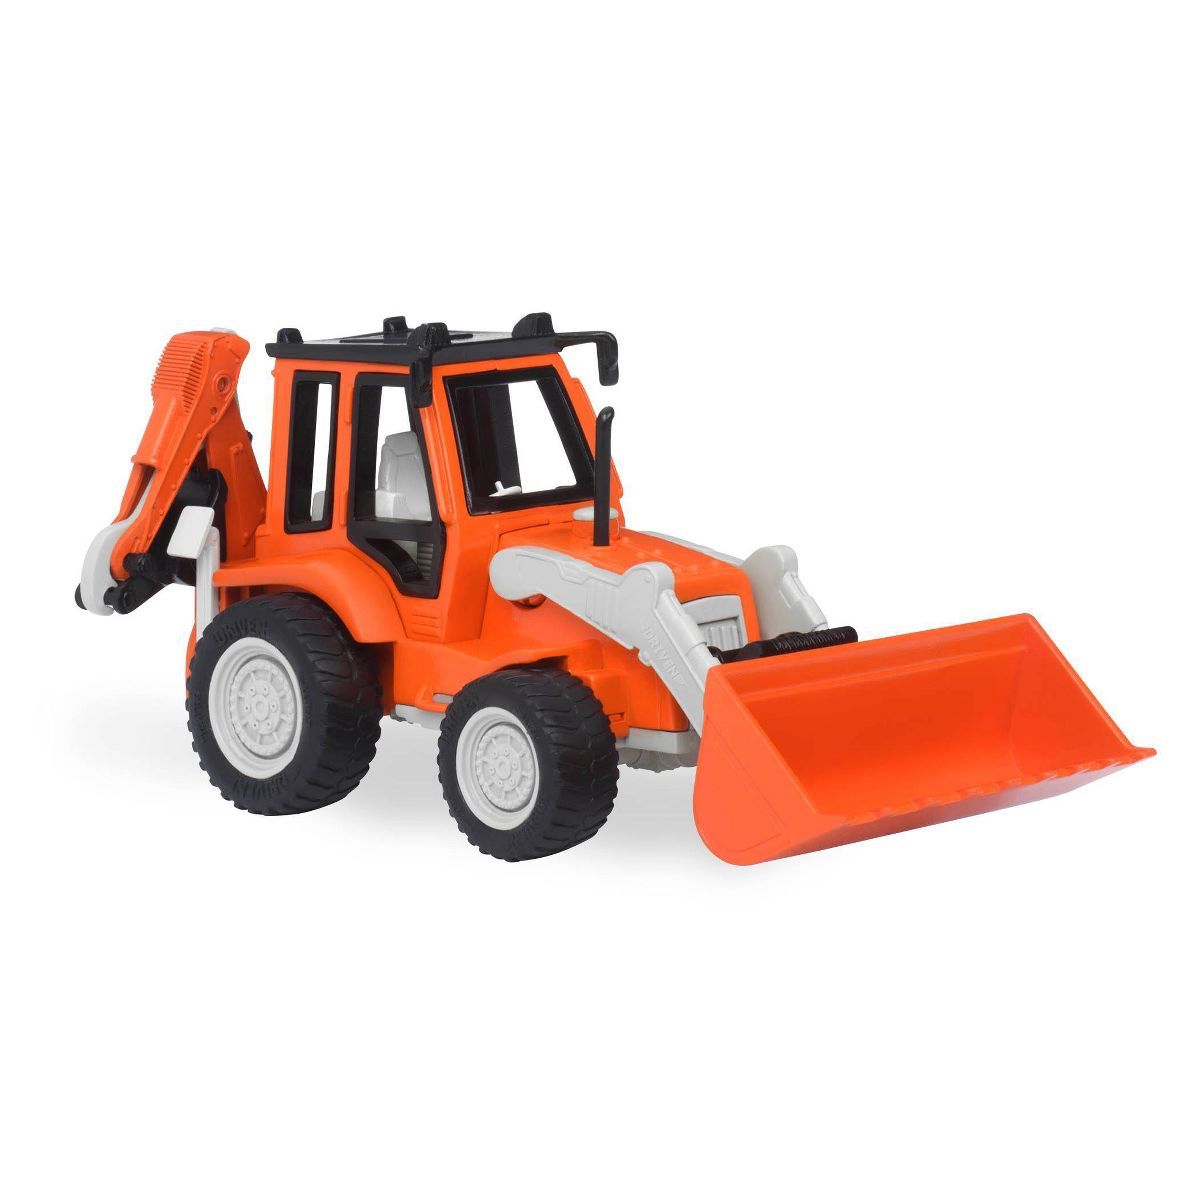 DRIVEN by Battat – Toy Digger Truck – Backhoe Loader – Micro Series | Target